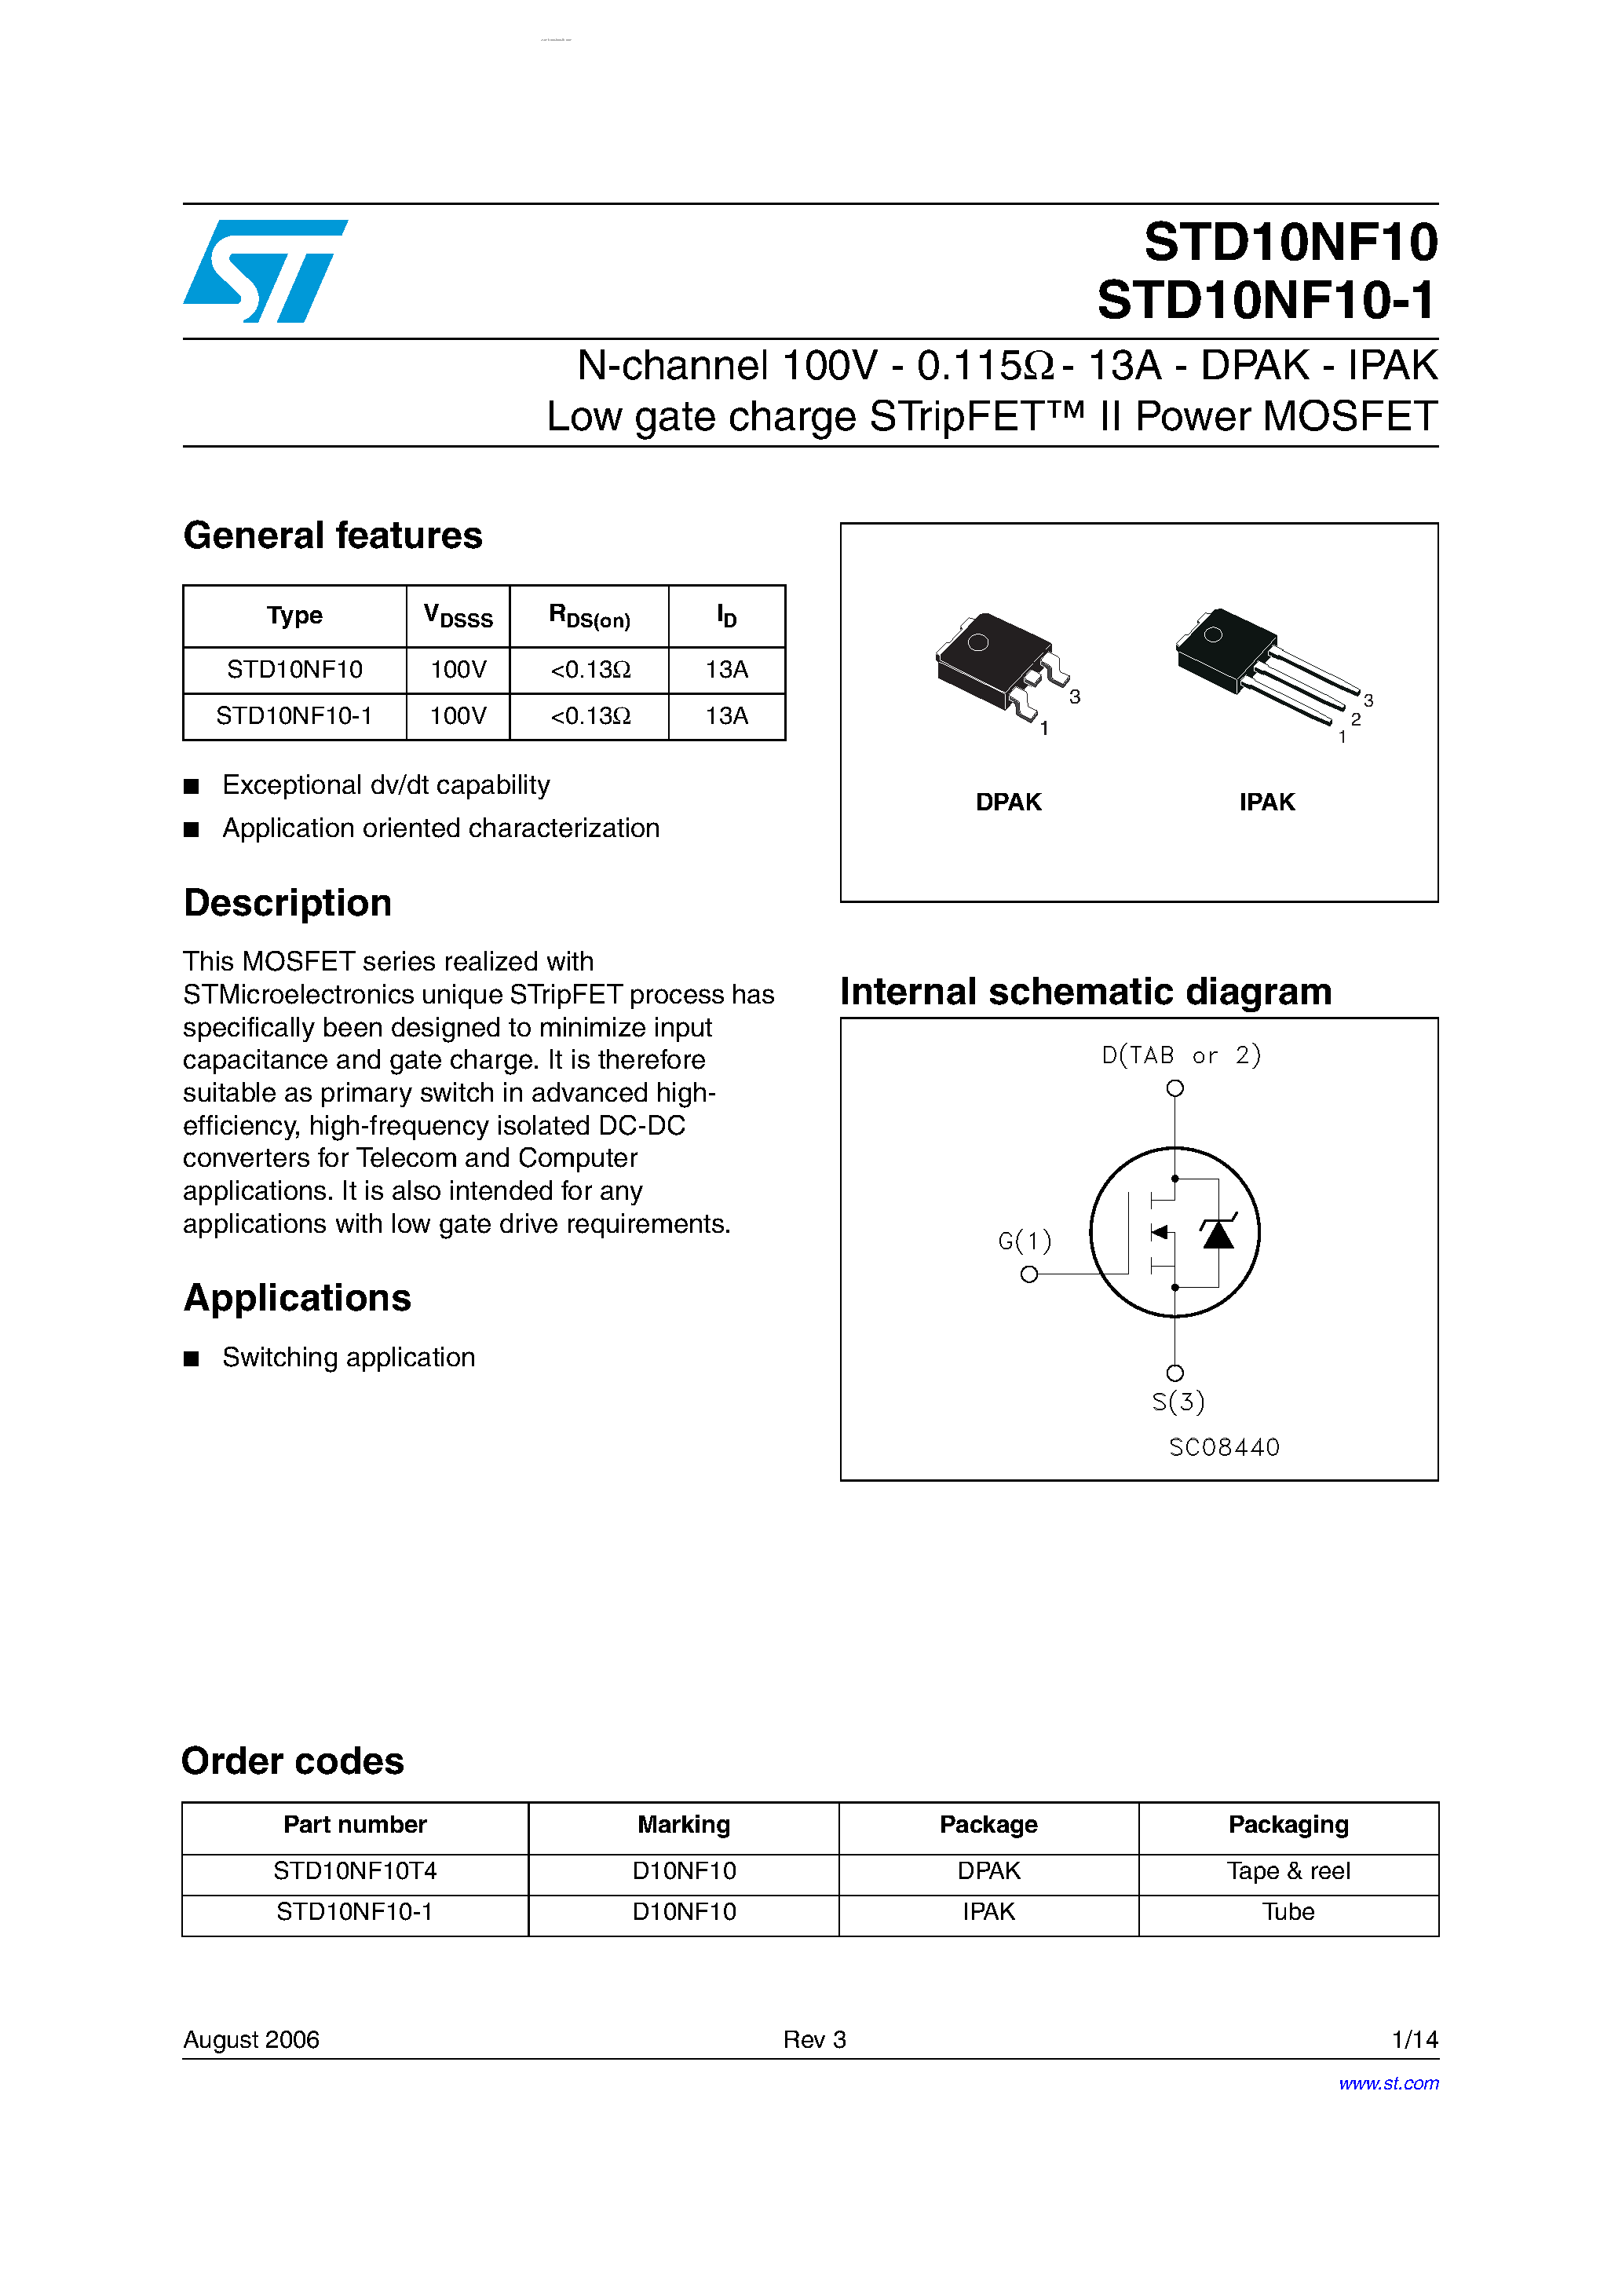 Datasheet STD10NF10-1 - N-CHANNEL POWER MOSFET page 1